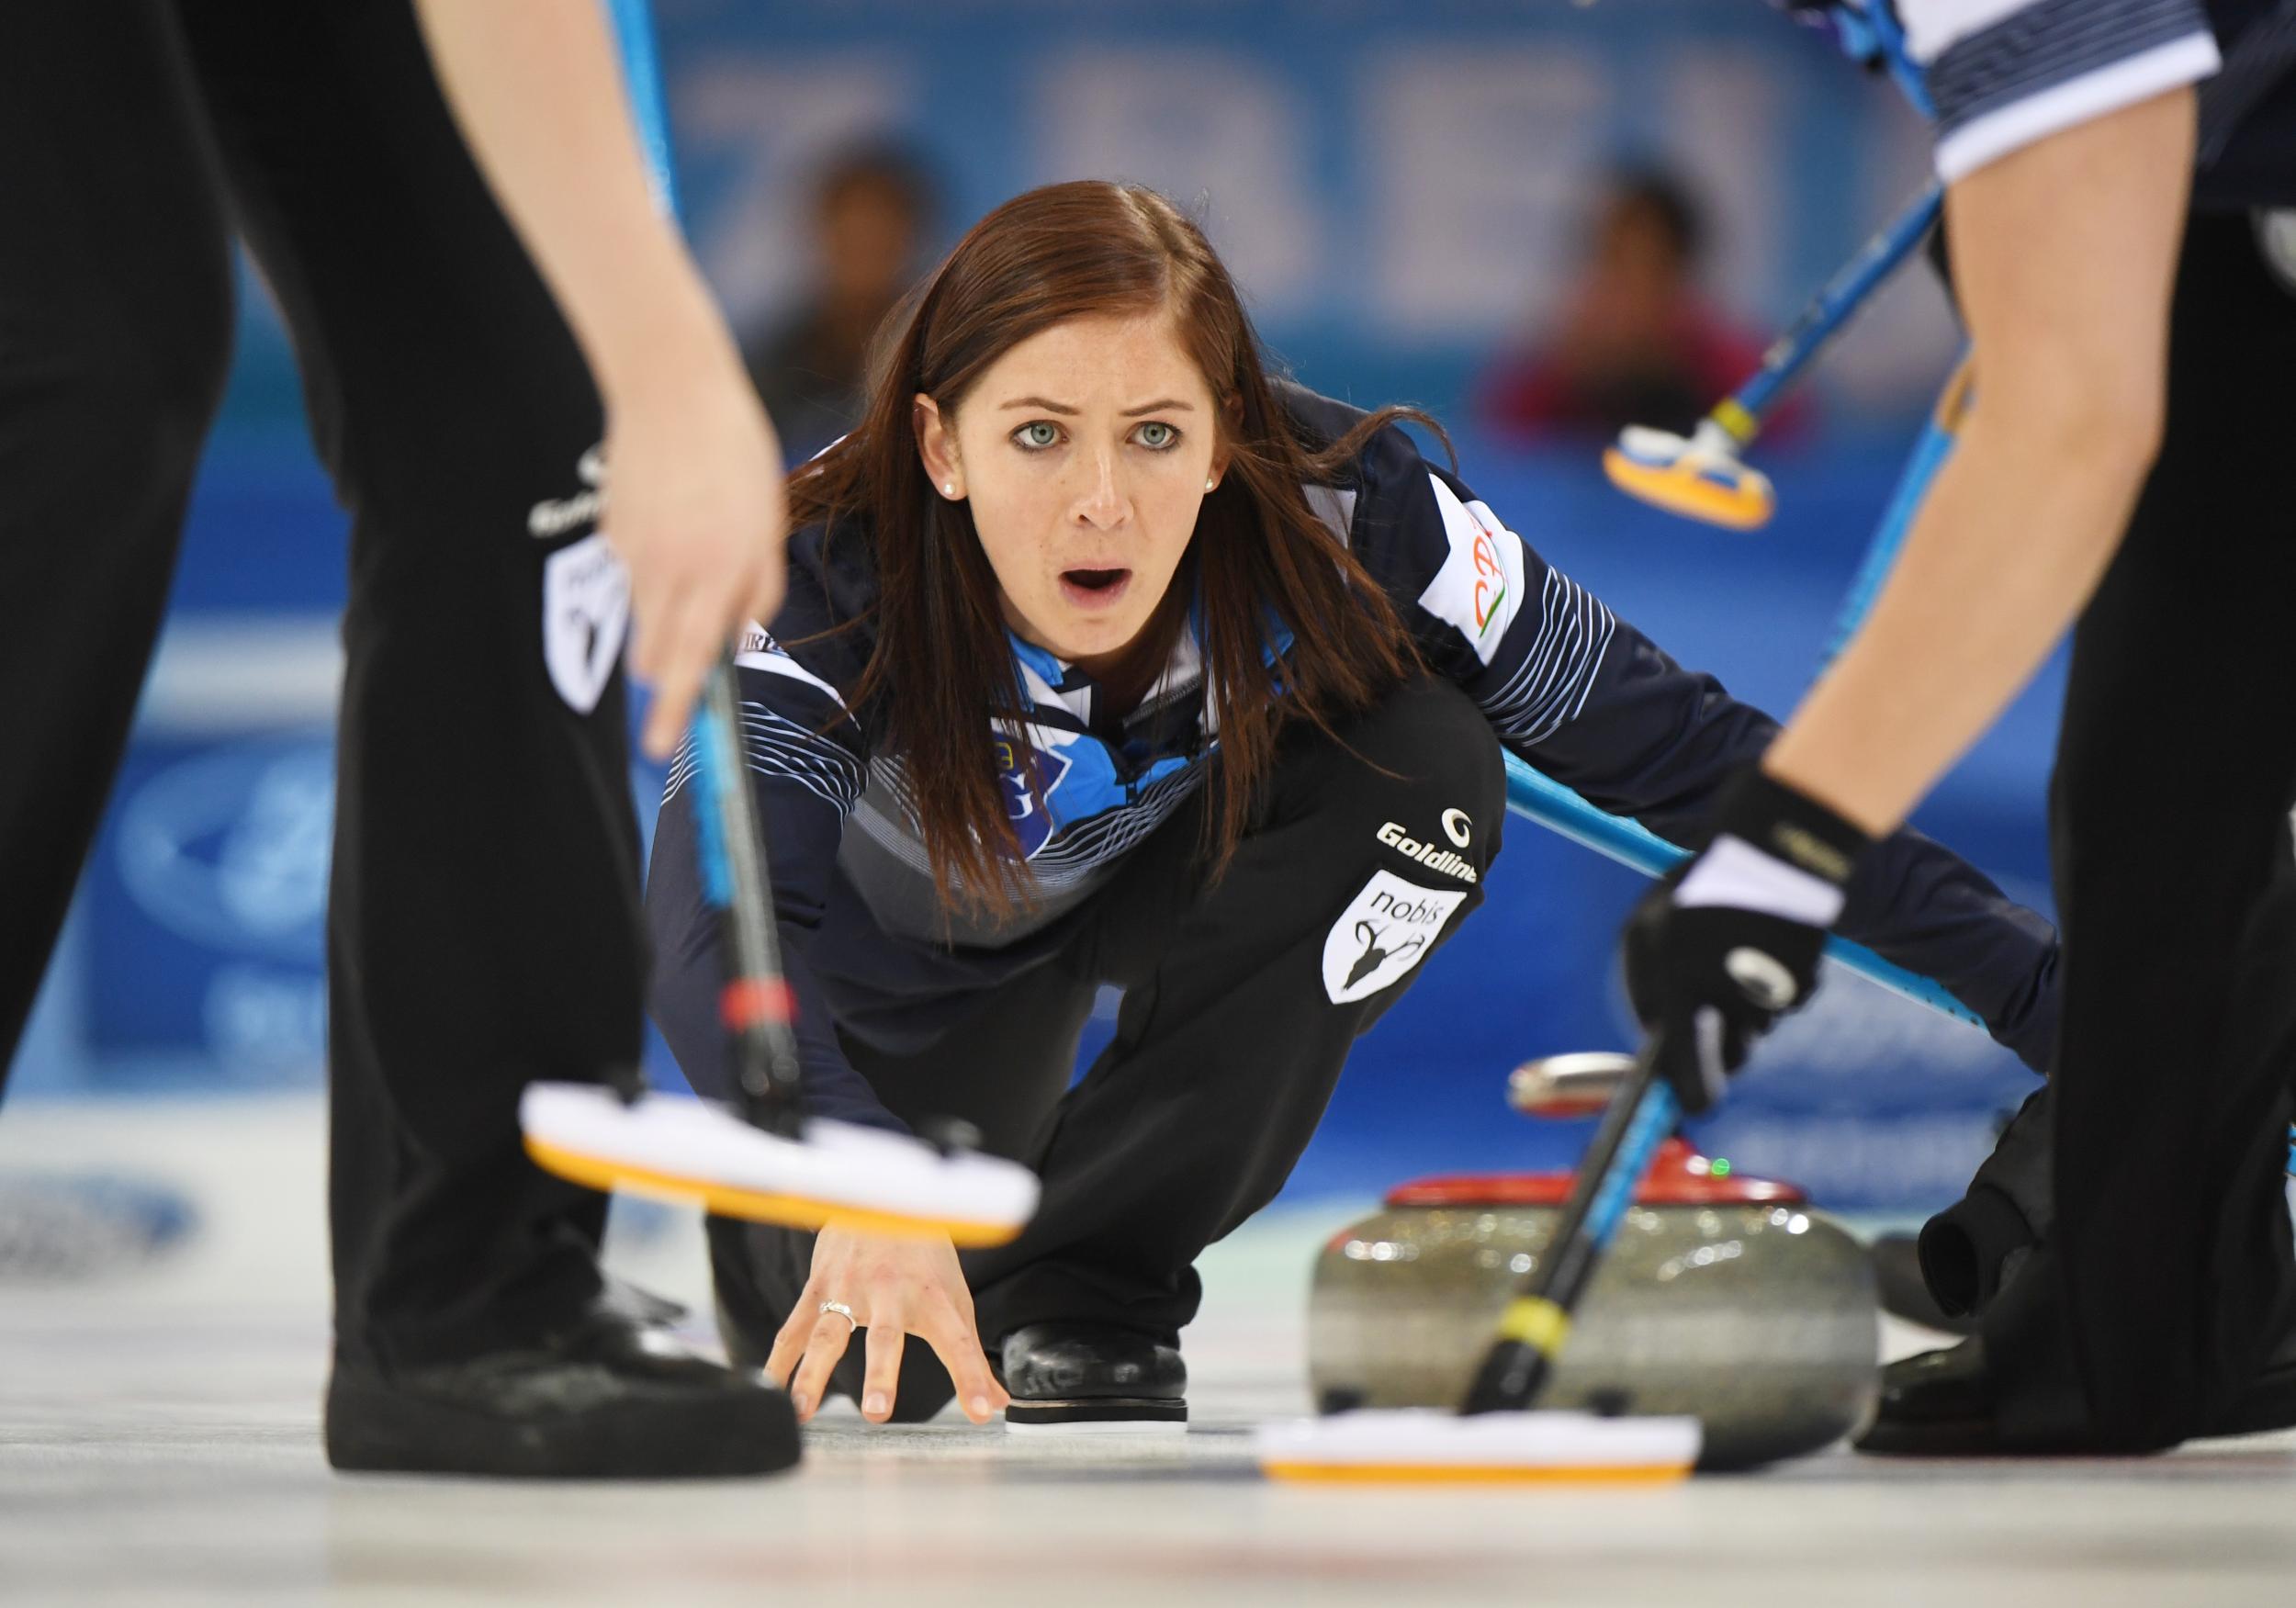 Muirhead is in her third Olympics